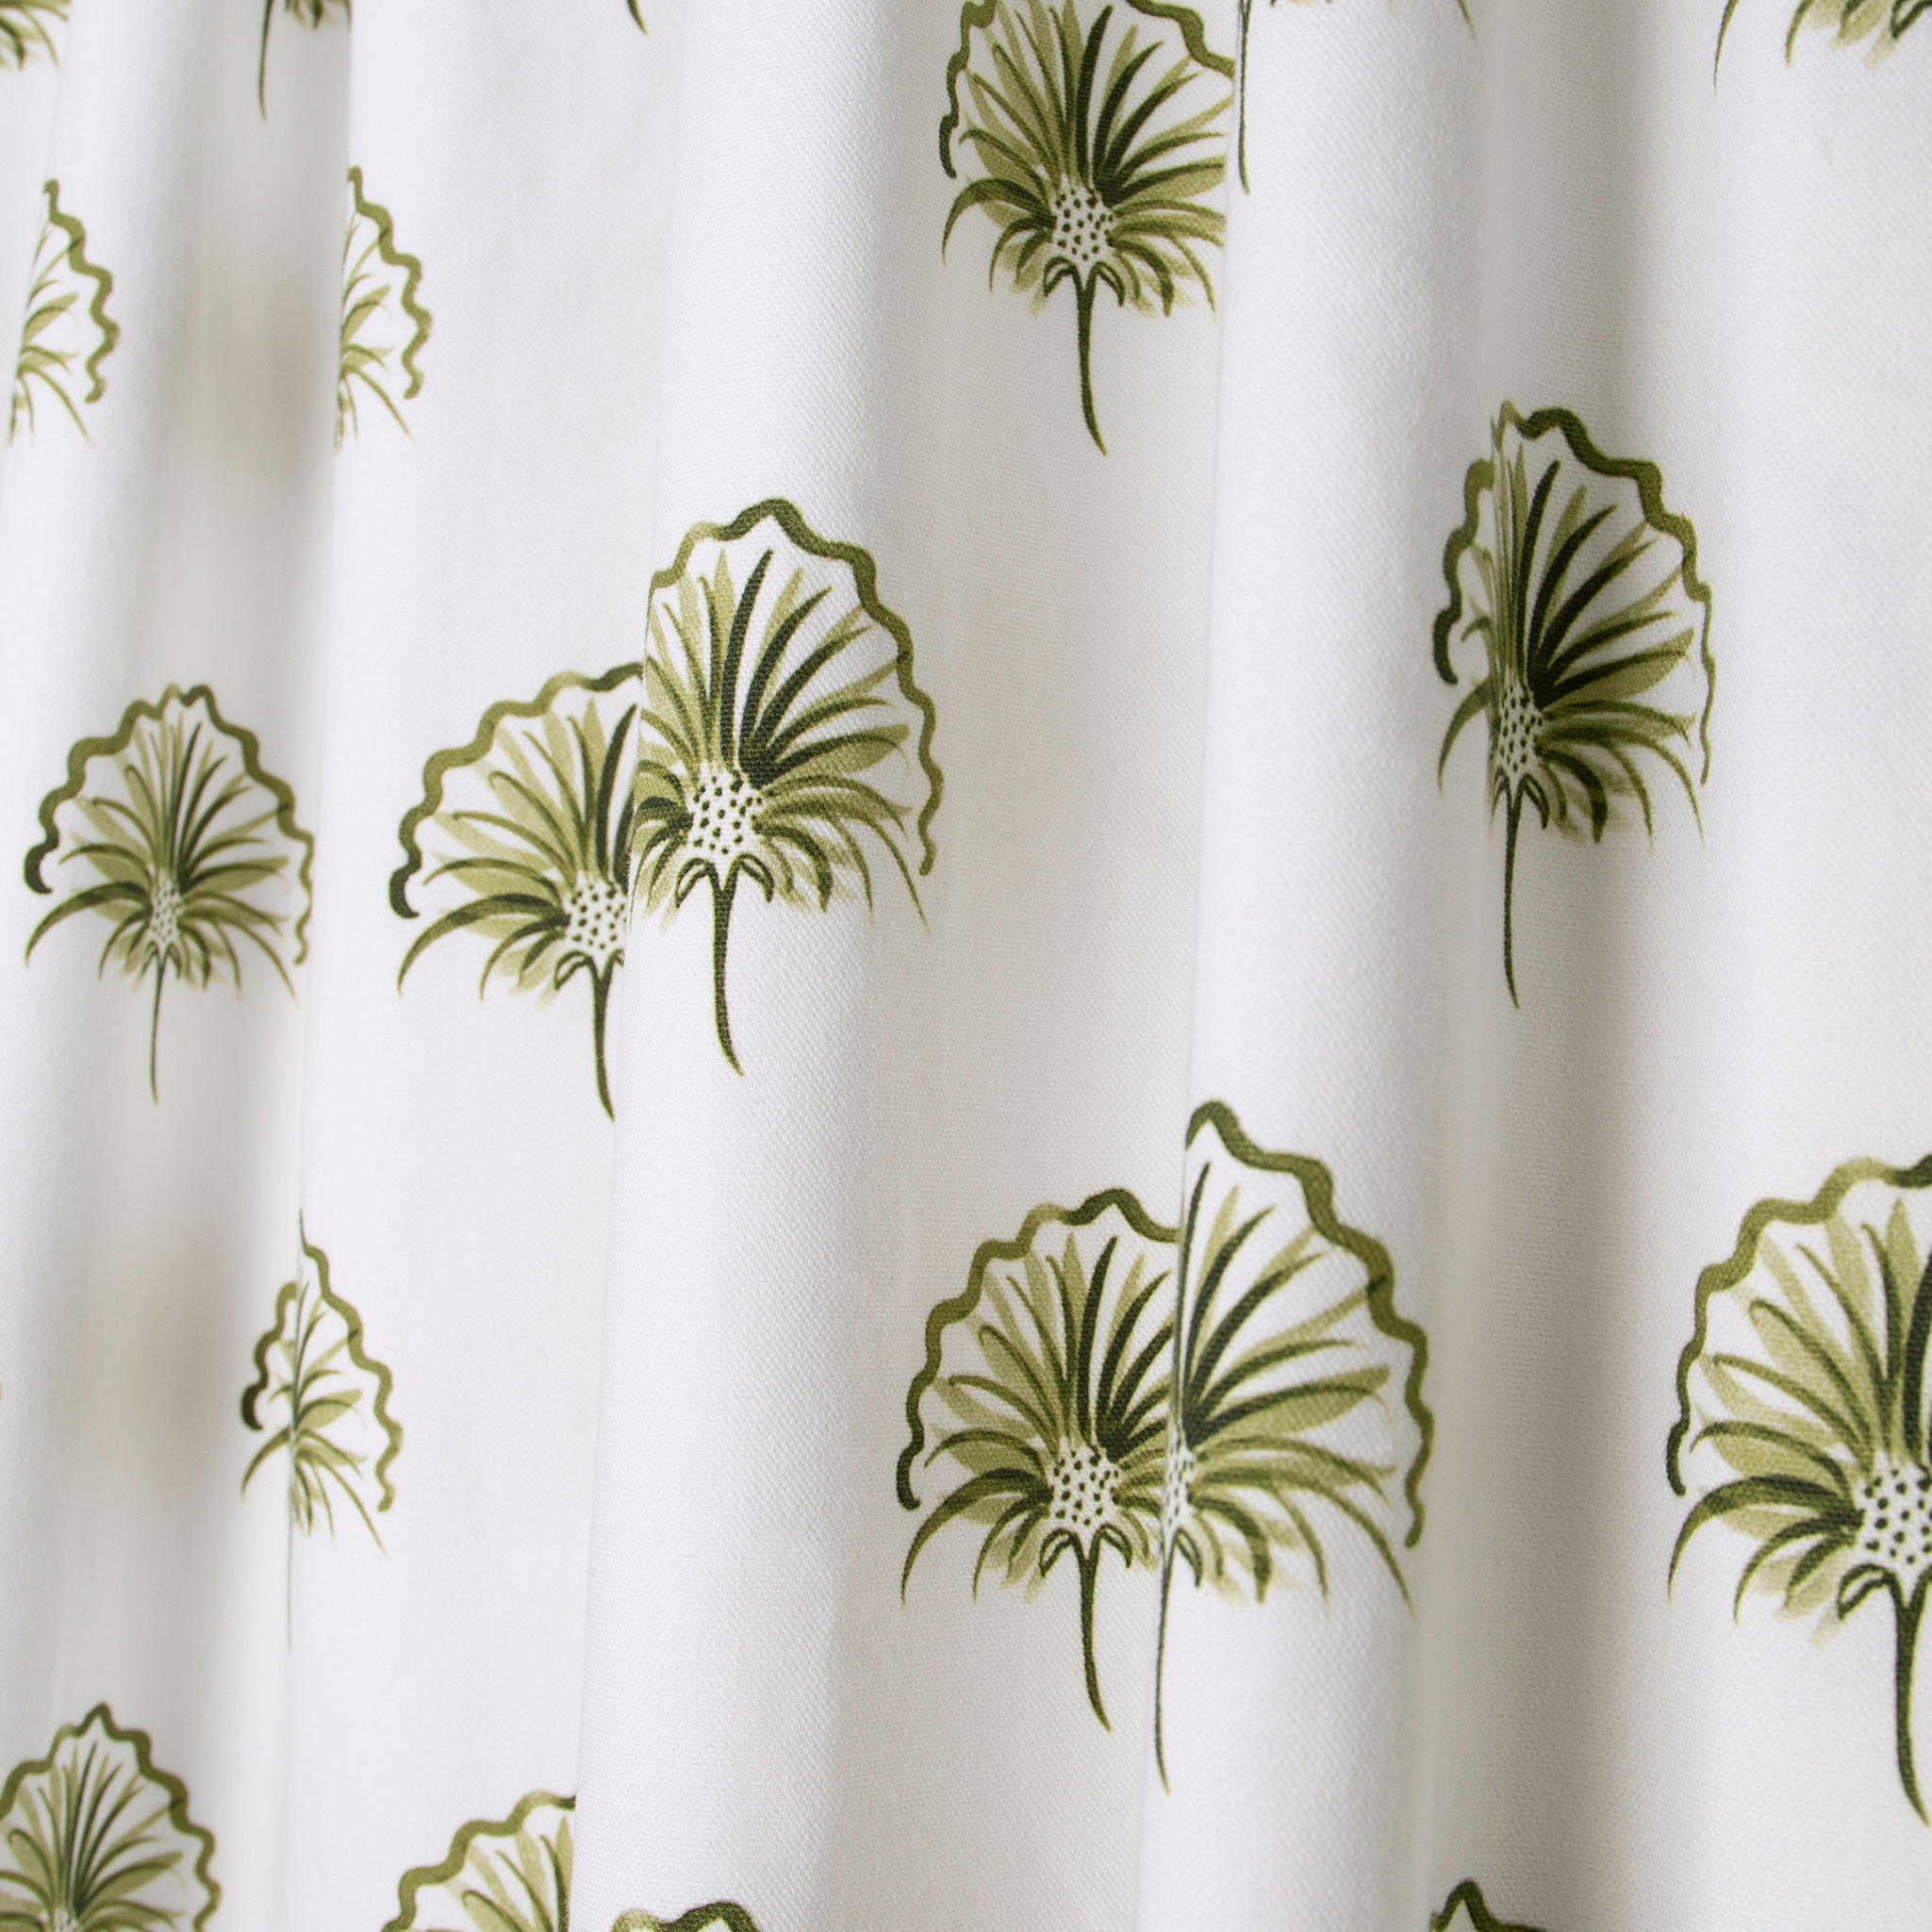 Green Floral Printed Curtain Close-Up